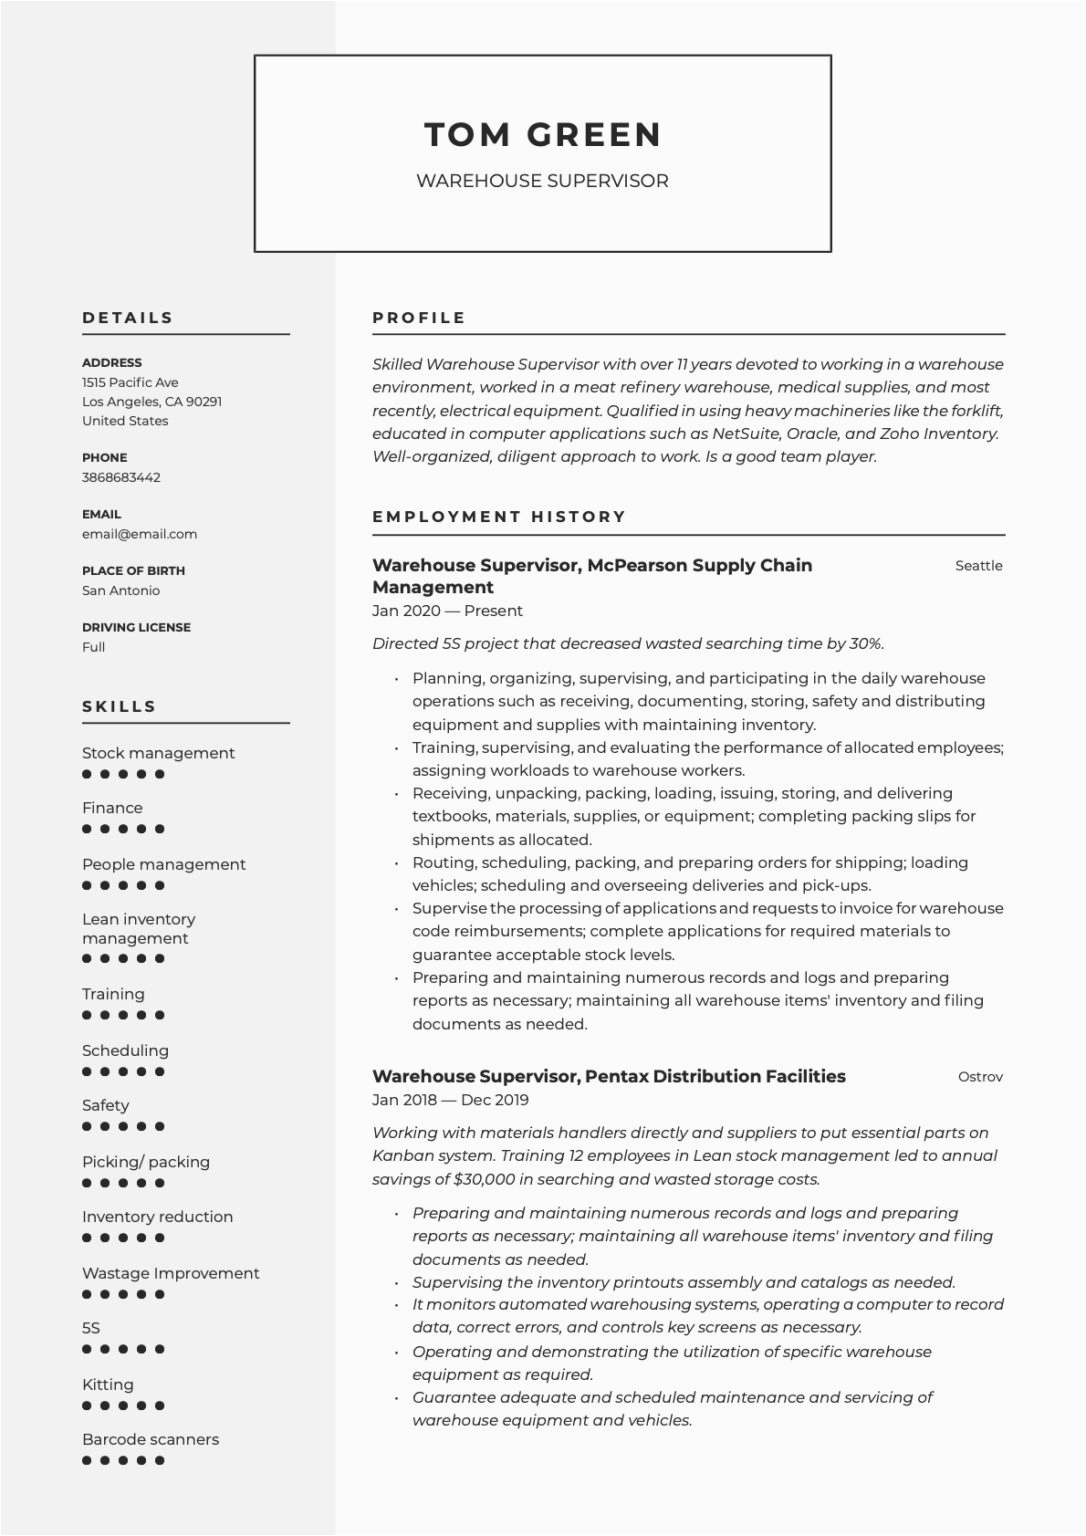 Samples Of Combination Resumes for Warehouse Positions Warehouse Supervisor Resume & Writing Guide